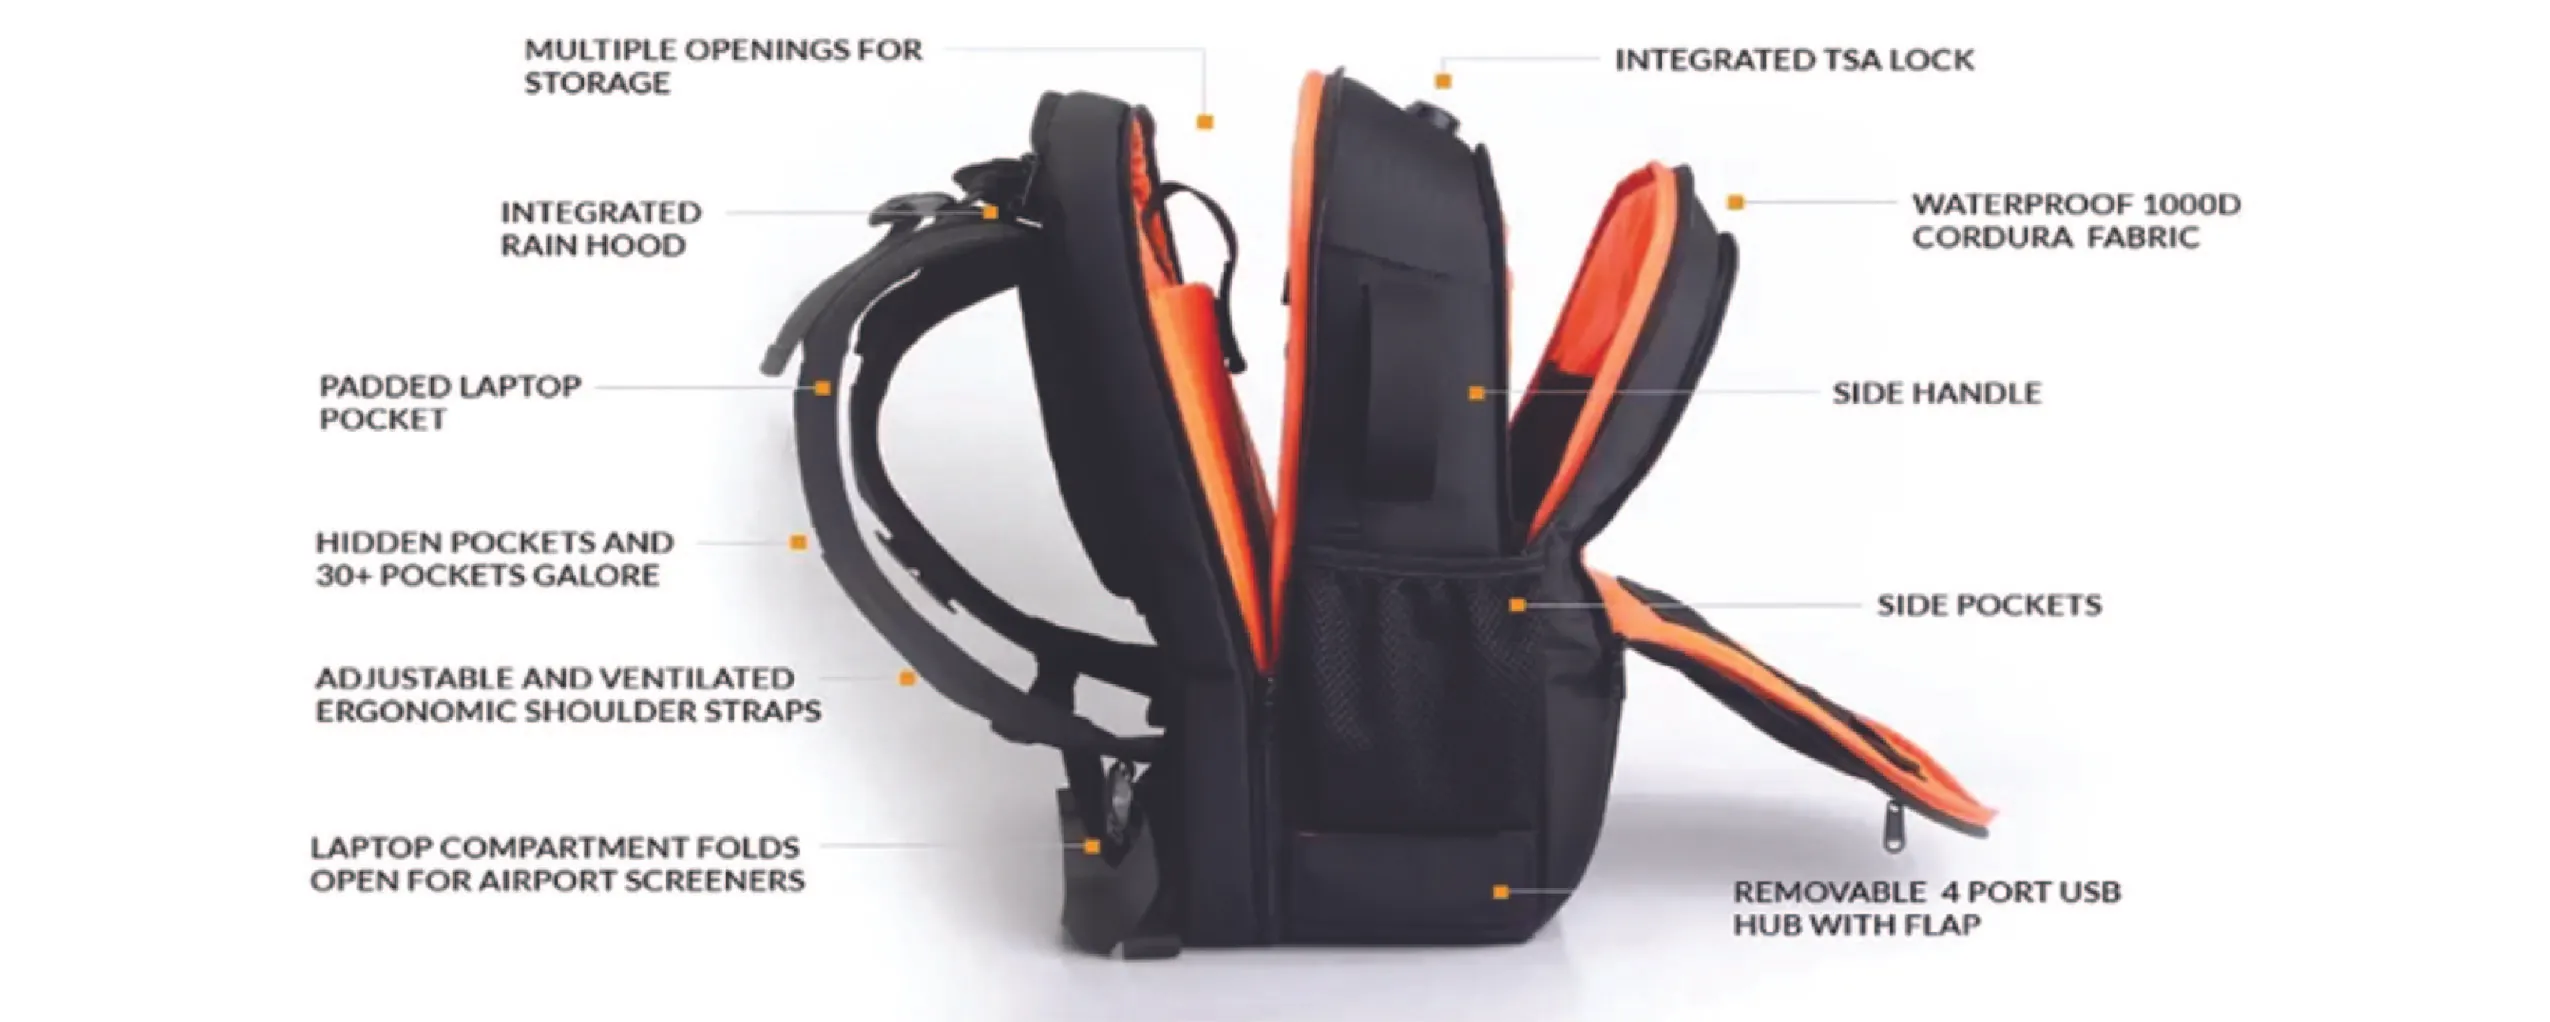 A photograph of the iBackPack labels its features: multiple openings for storage, integrated rain hood, padded laptop pocket, hidden pockets and 30+ pockets galore, adjustable and ventilated ergonomic shoulder straps, laptop compartment folds open for airport screeners, integrated TSA lock, waterproof 1000D cordura fabric, side handle, side pockets, and a removable 4-port USB hub with flap.